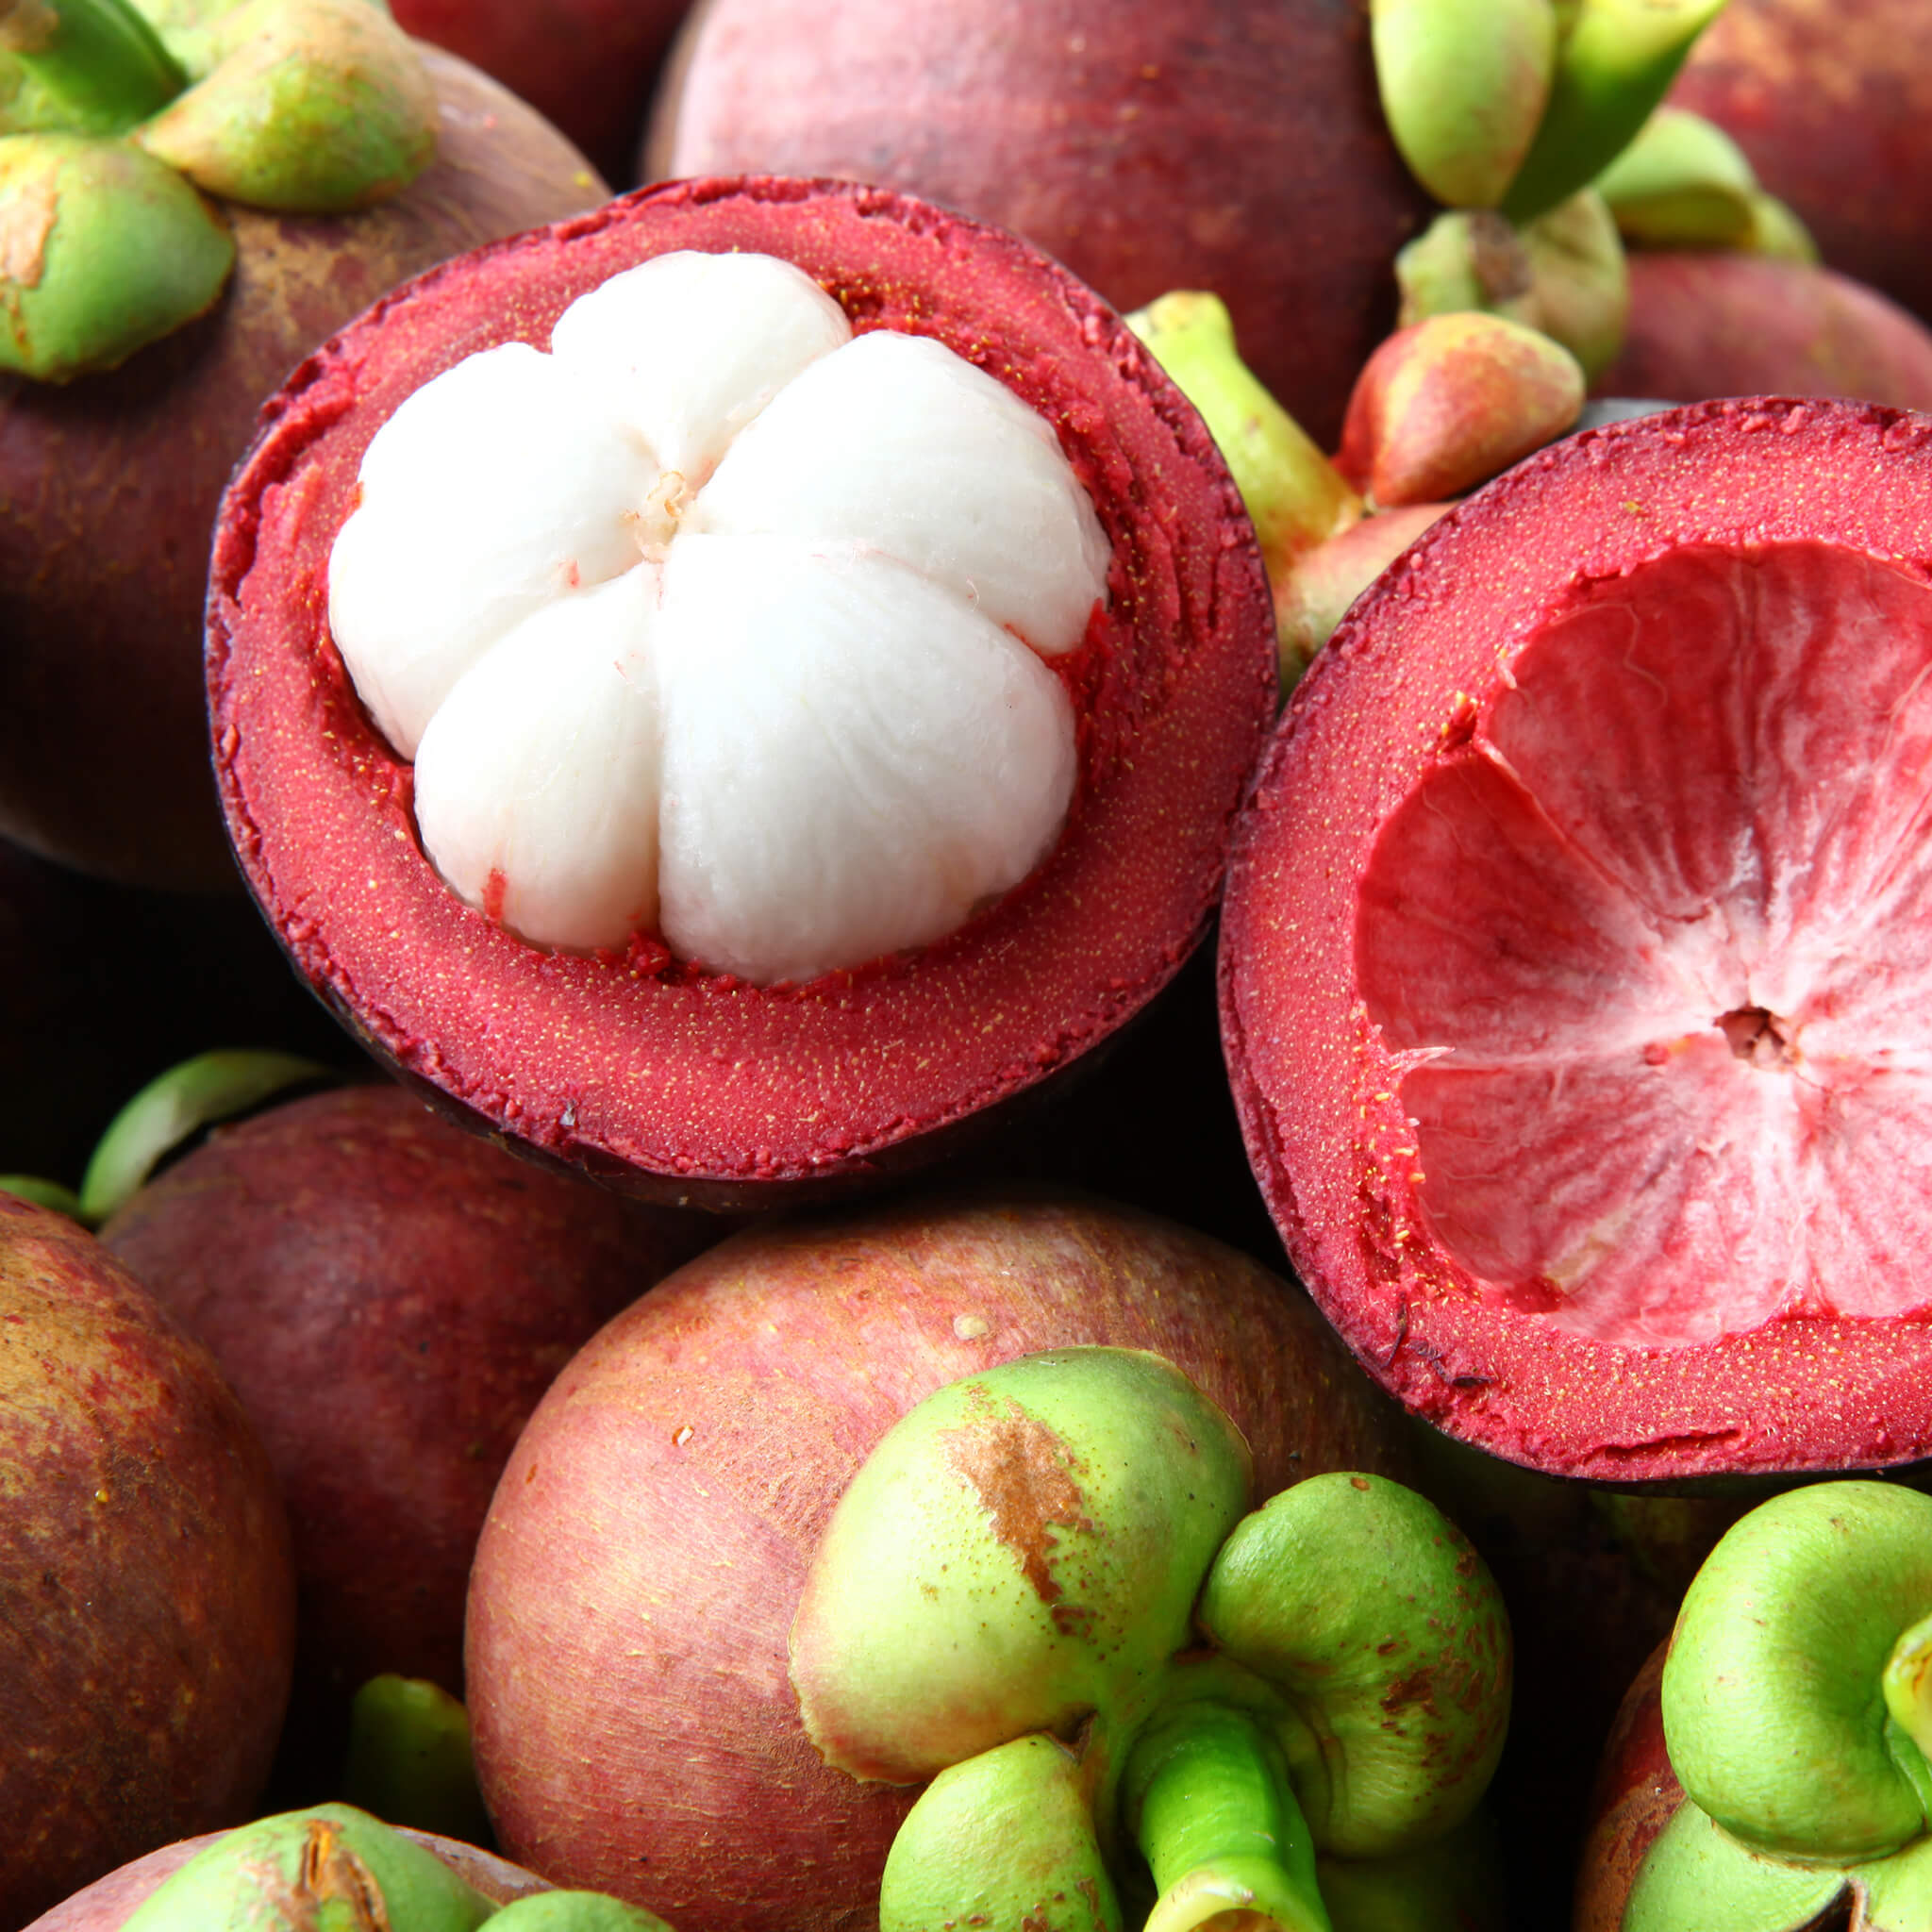 Product Page Key Ingredients: Mangosteen